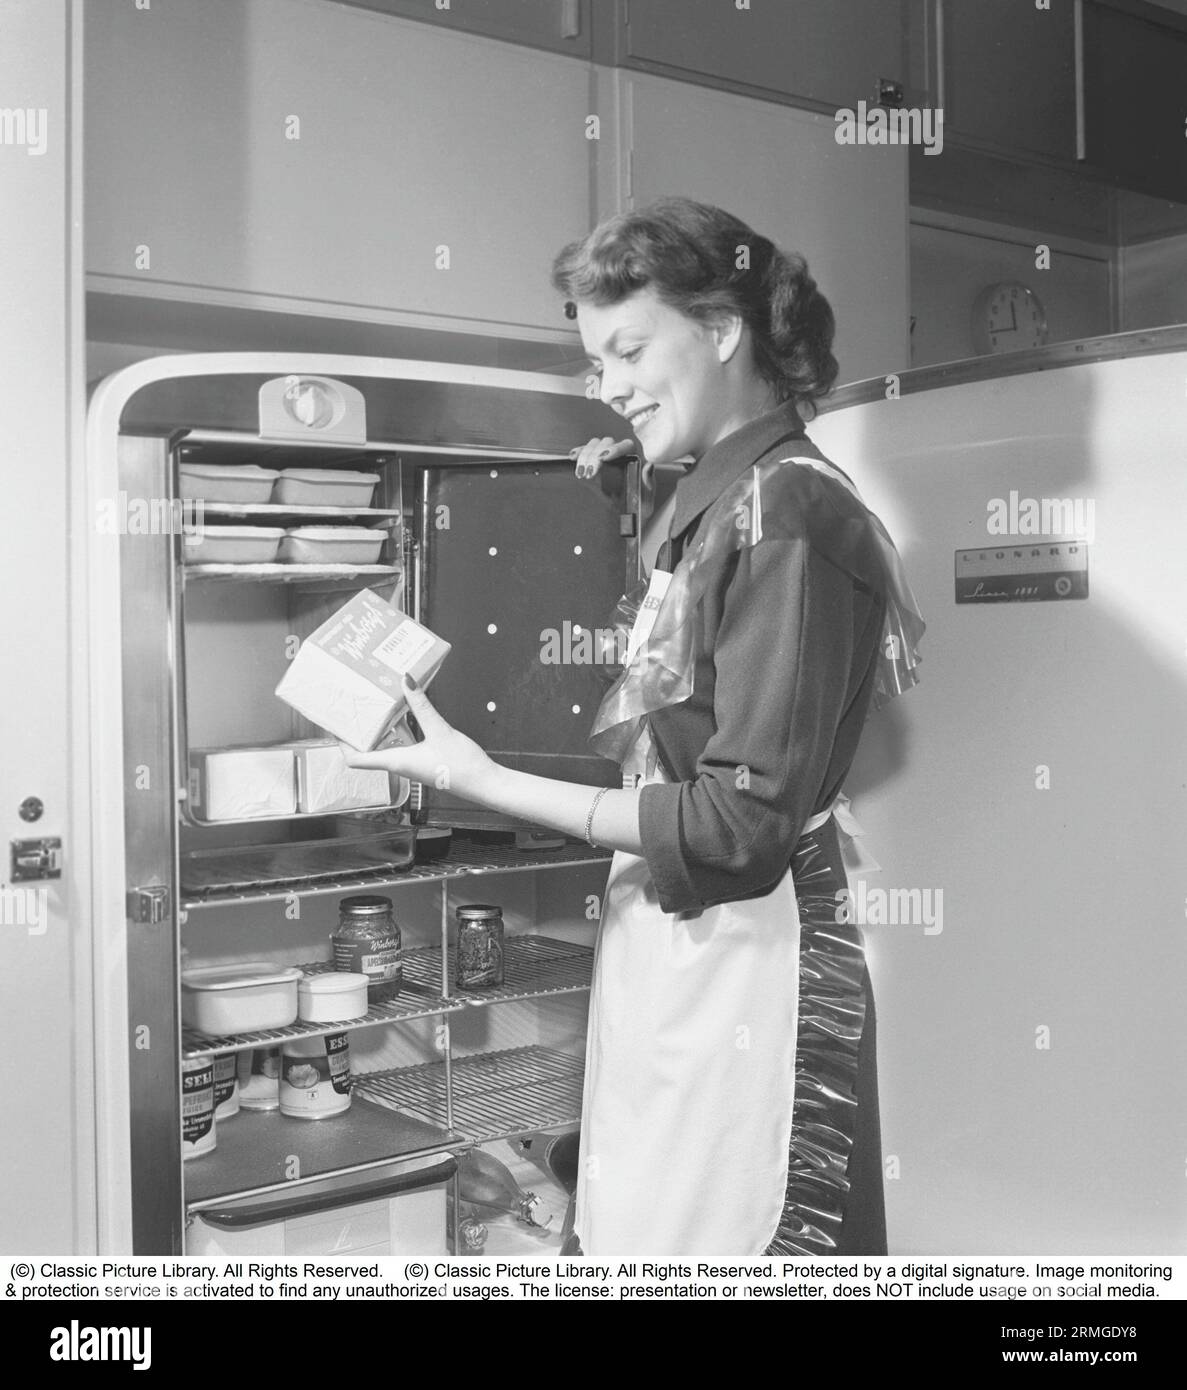 In the kitchen 1950s. Interior of a kitchen and a young woman standing at the Leonard refrigirator with it's door open, showing the cans and bottes of different food standing on the shelfes. A separate freezing cabinet is intergrated in the fridge, a fairly new feature at this time. She is wearing a plastic apron.  She is Haide Göransson, 1928-2008, fashion model and actress. Sweden 1950 Kristoffersson ref AU22-10 Stock Photo